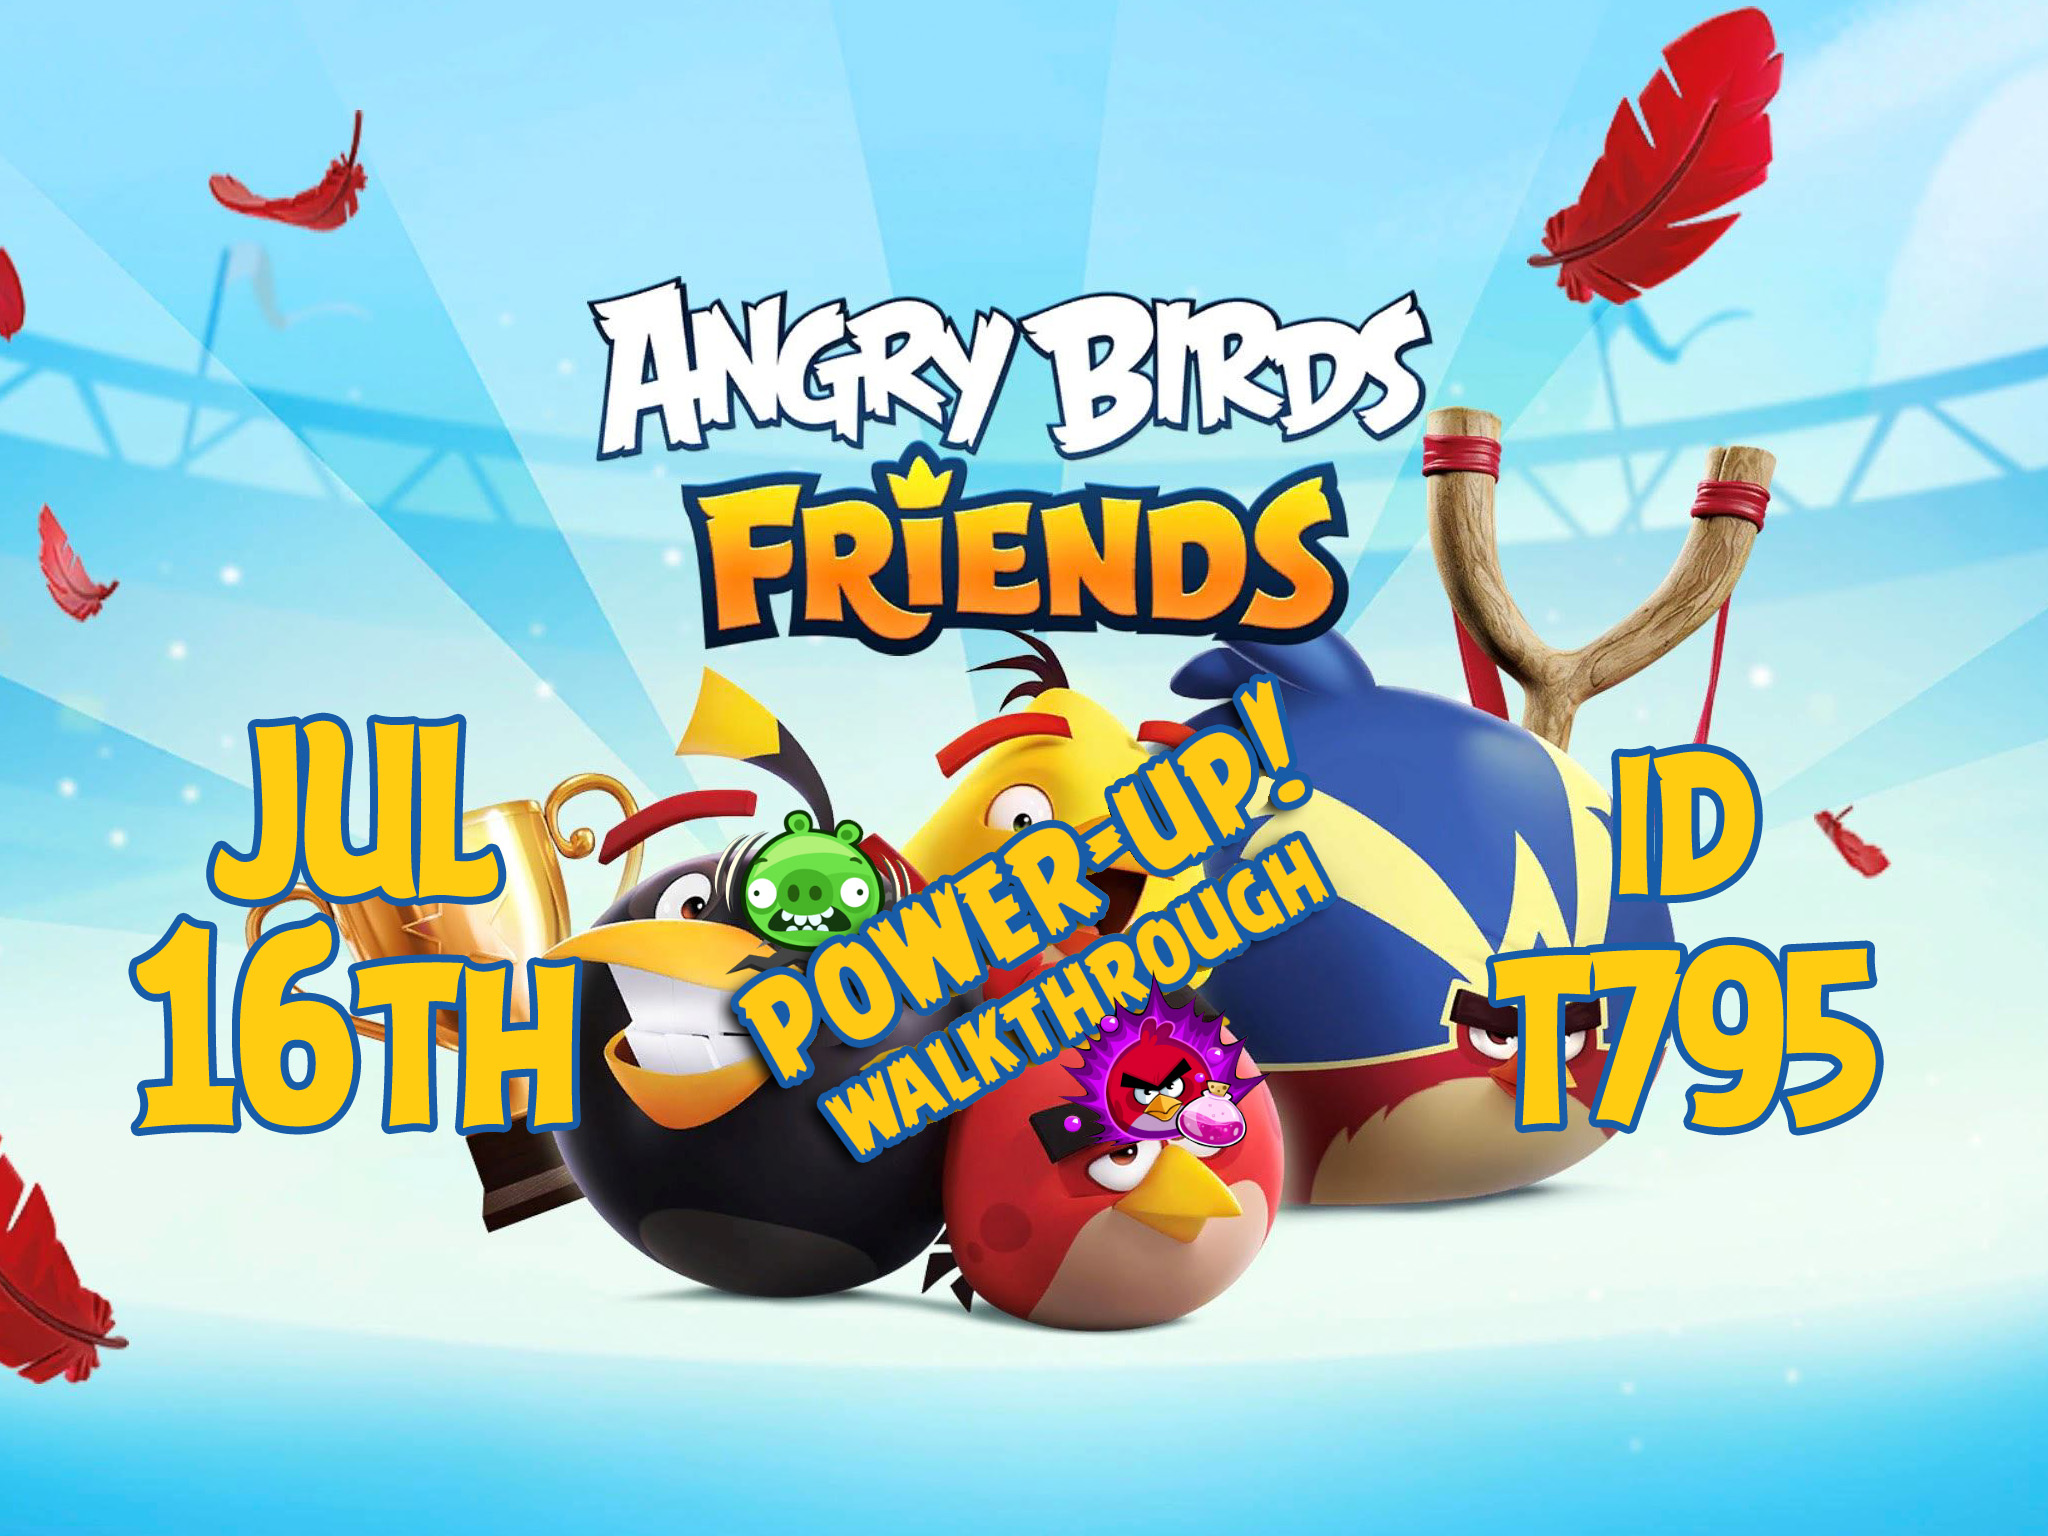 Angry-Birds-Friends-Tournament-T795-Feature-Image-PU